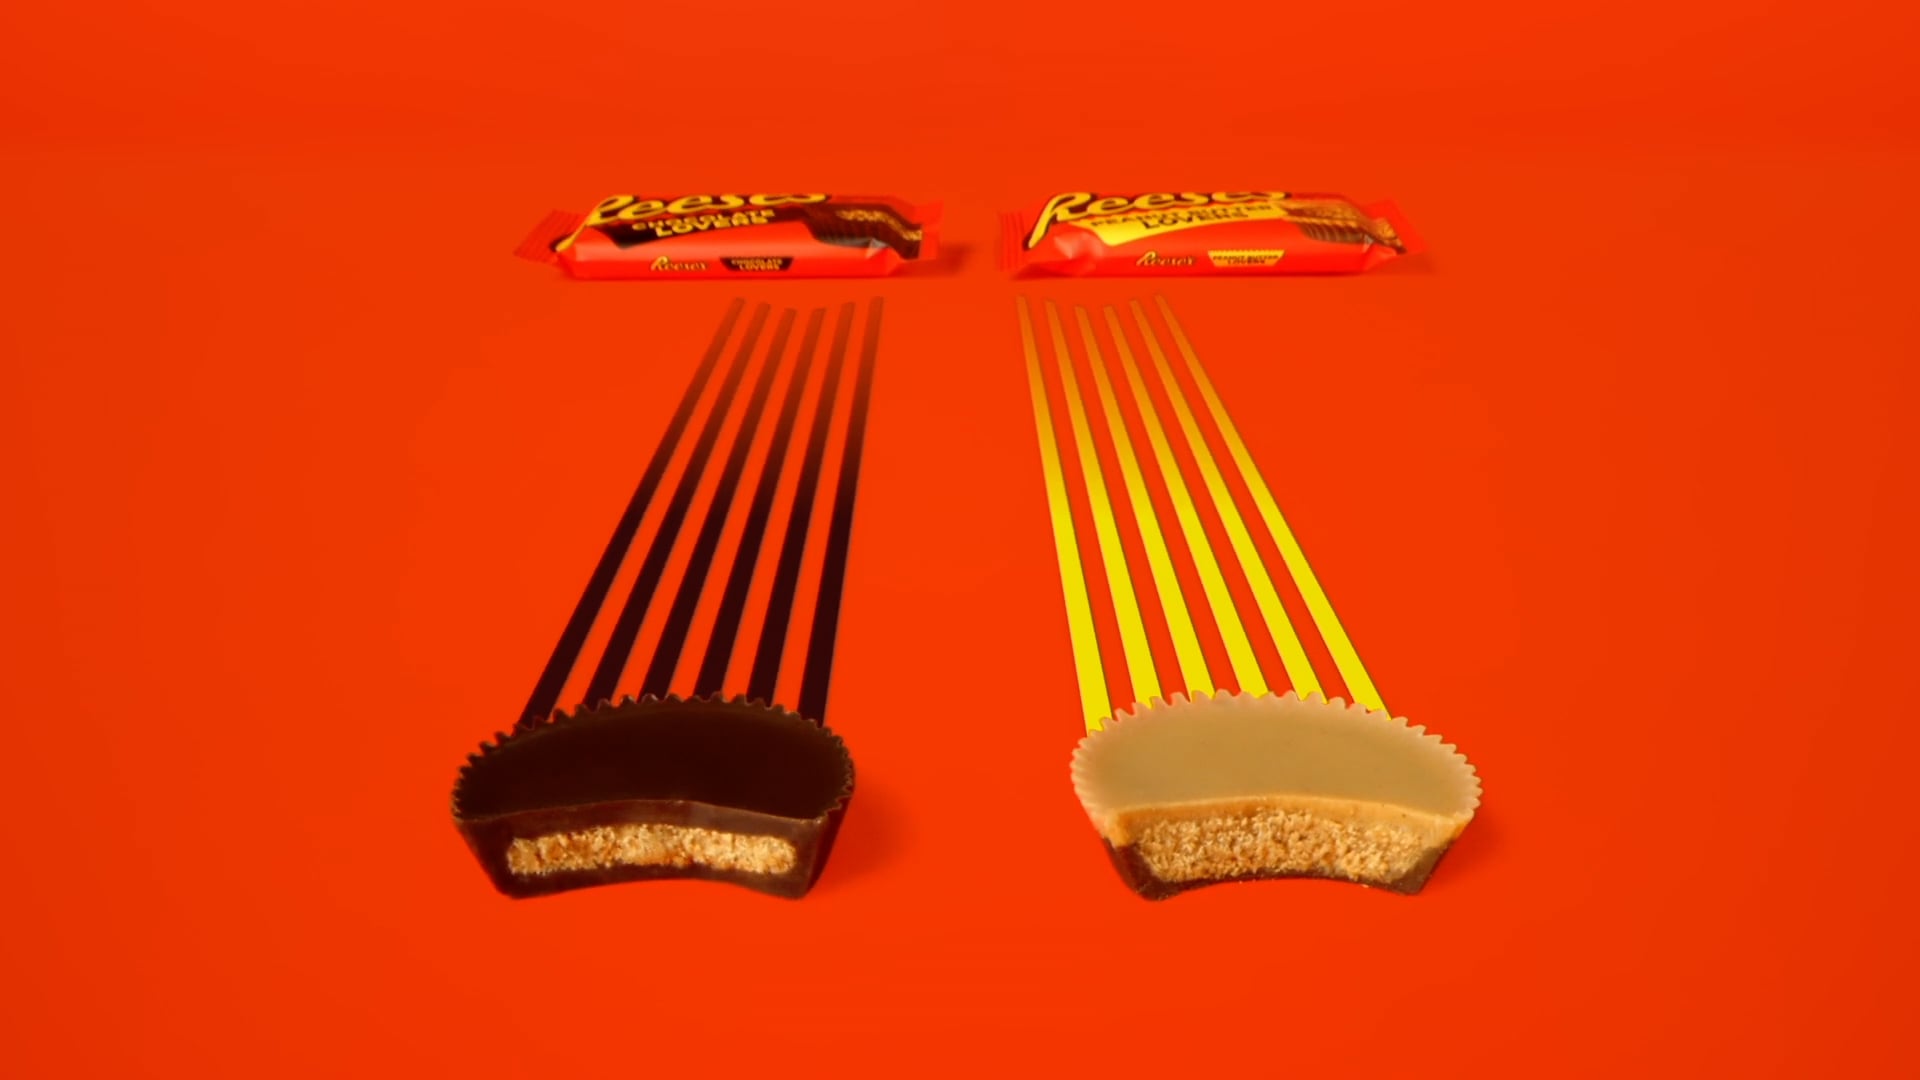 Reese's "GreatestEr"